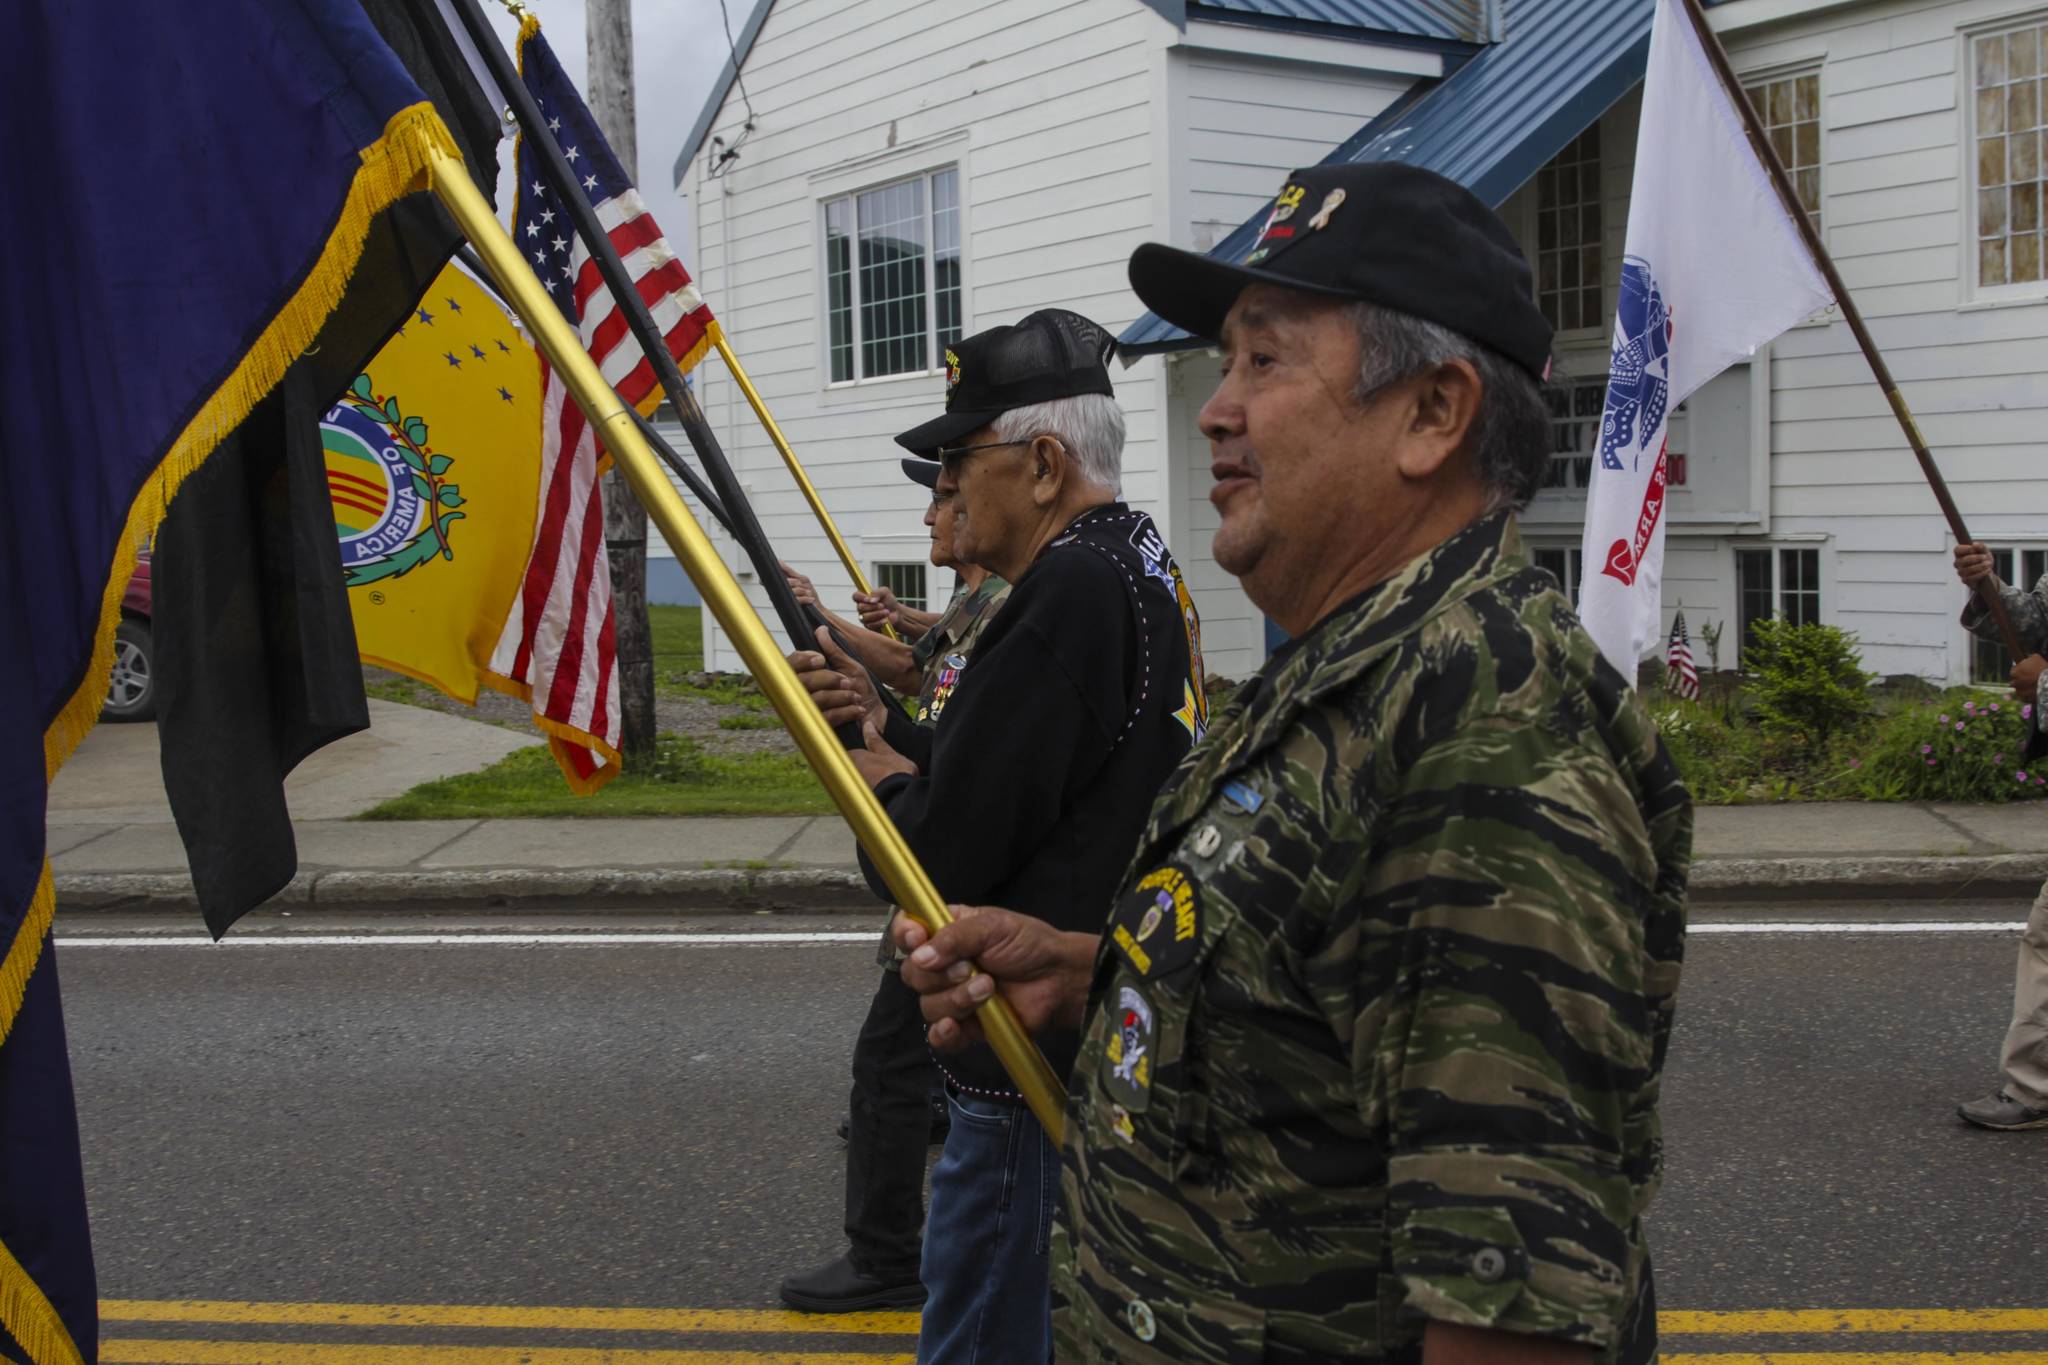 Veterans parade the colors on July 24, 2021 as hundreds gathered in Hoonah for the raising of a totem pole honoring veterans of the armed services. (Michael S. Lockett / Juneau Empire)